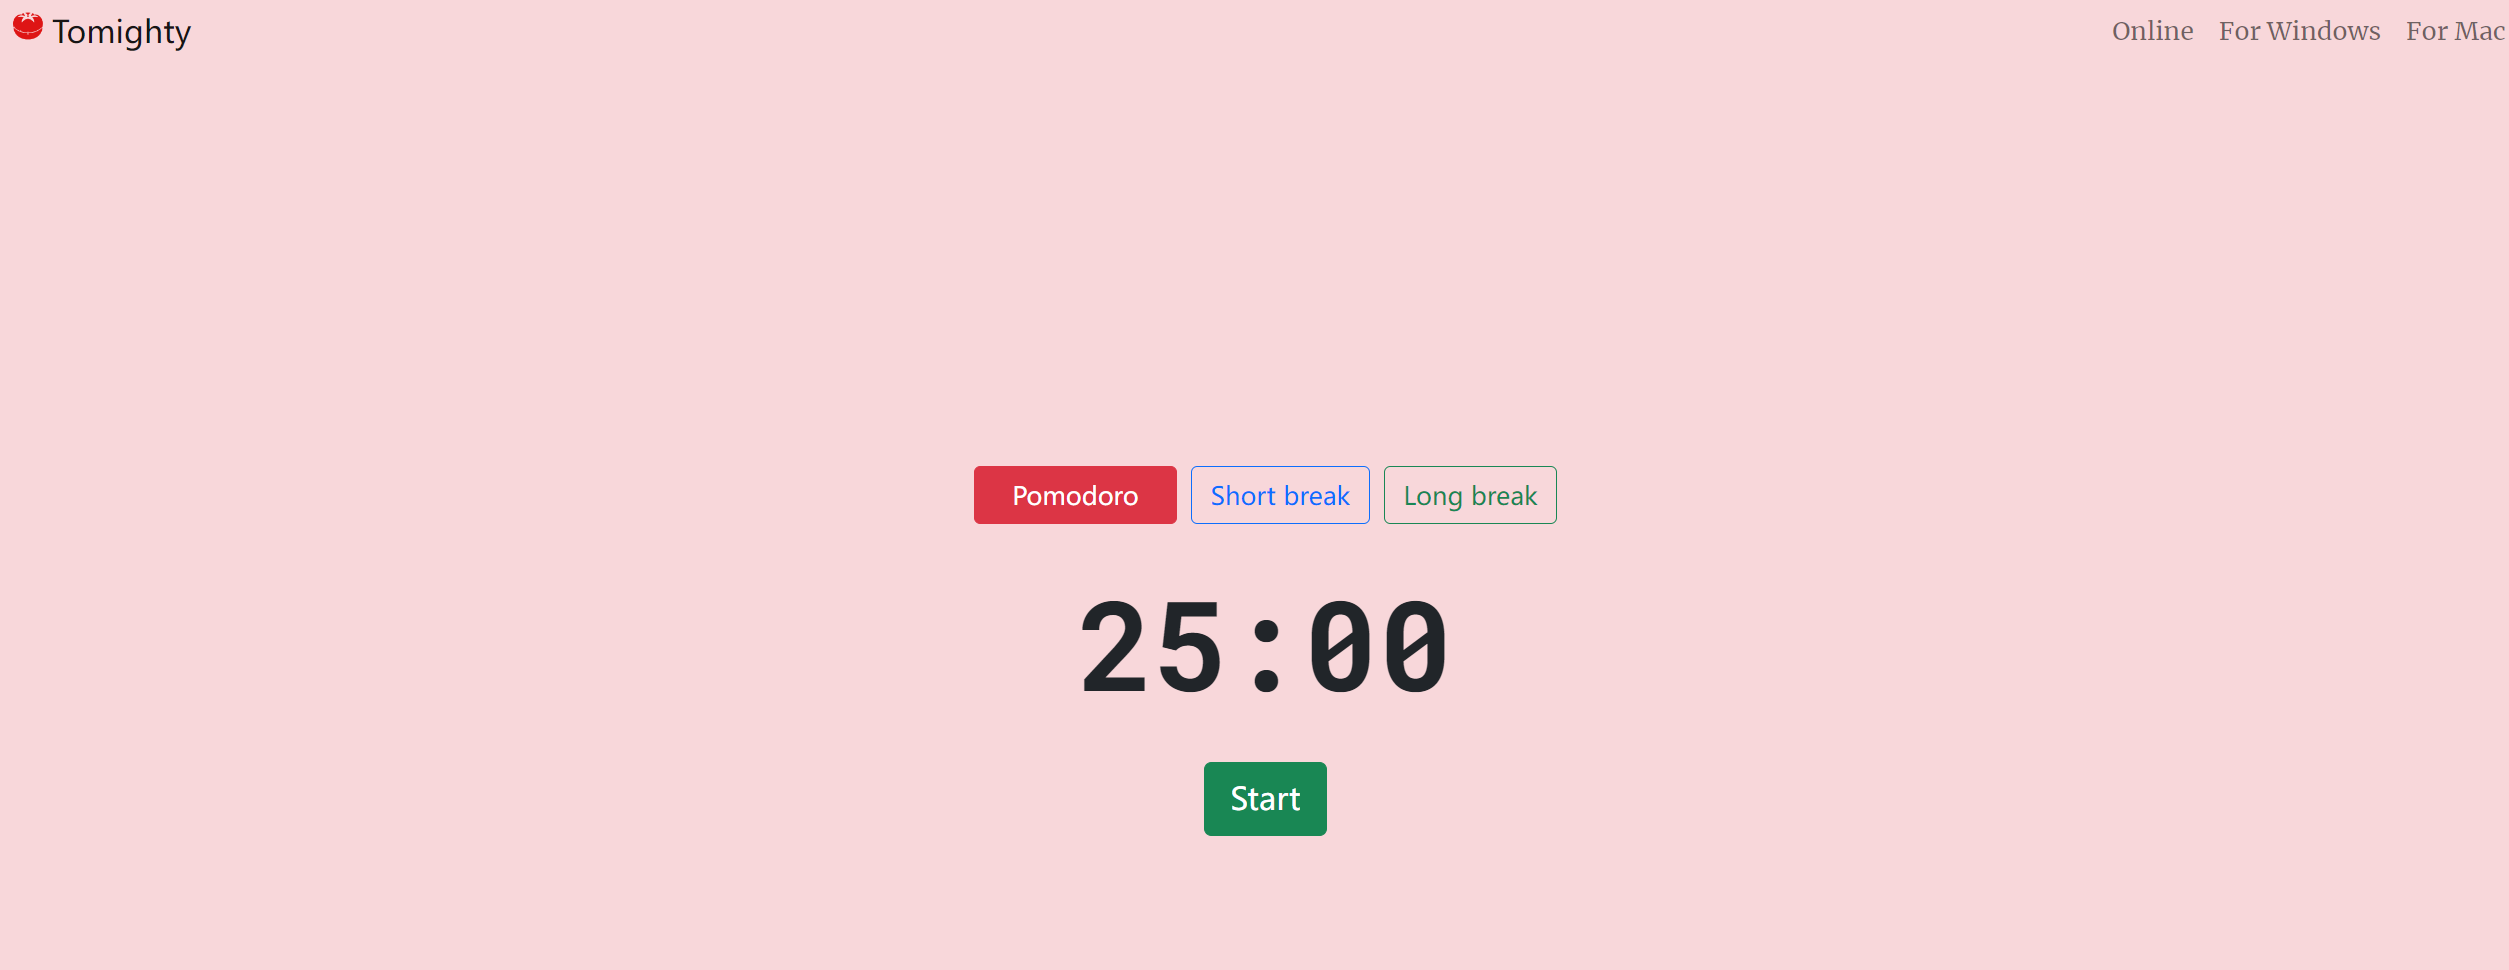 pomodoro technique timer Tomighty